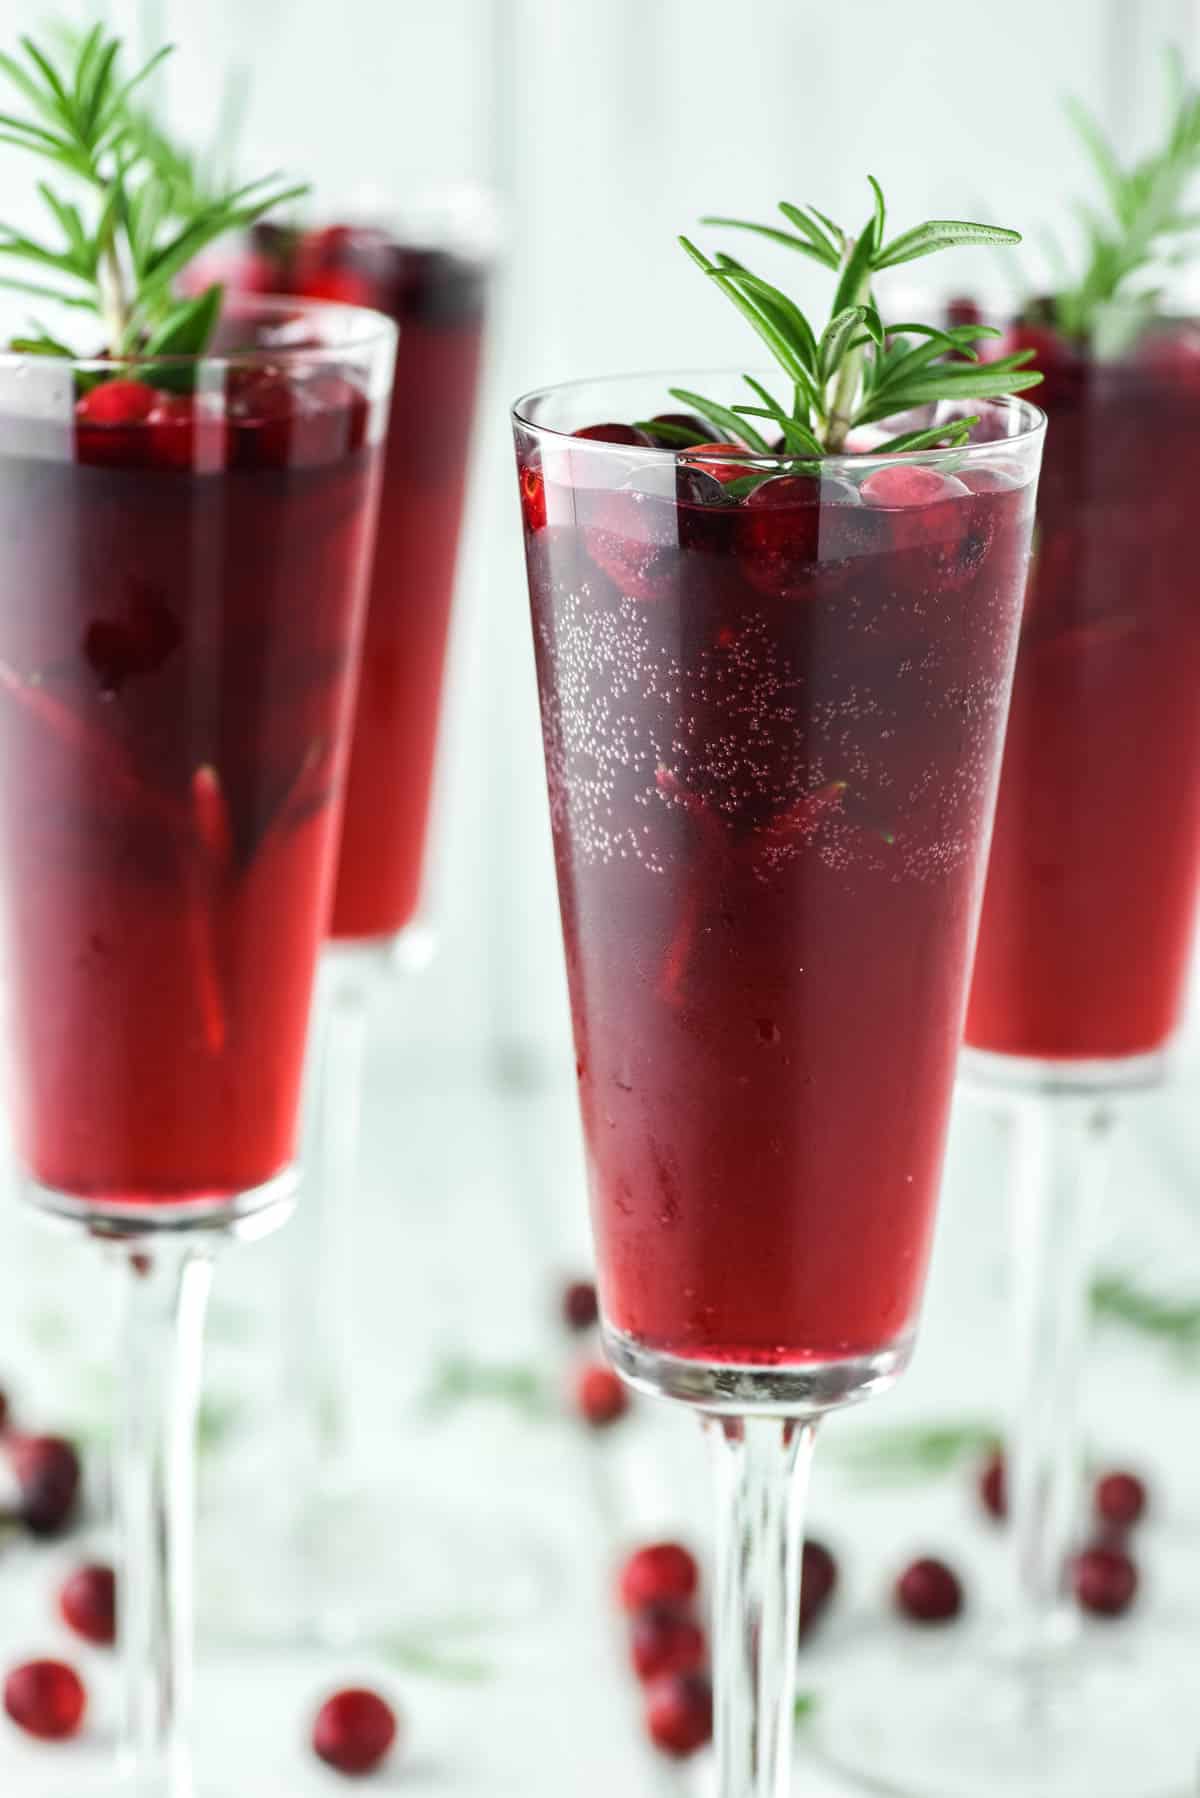 4 glasses of mimosas with cranberries